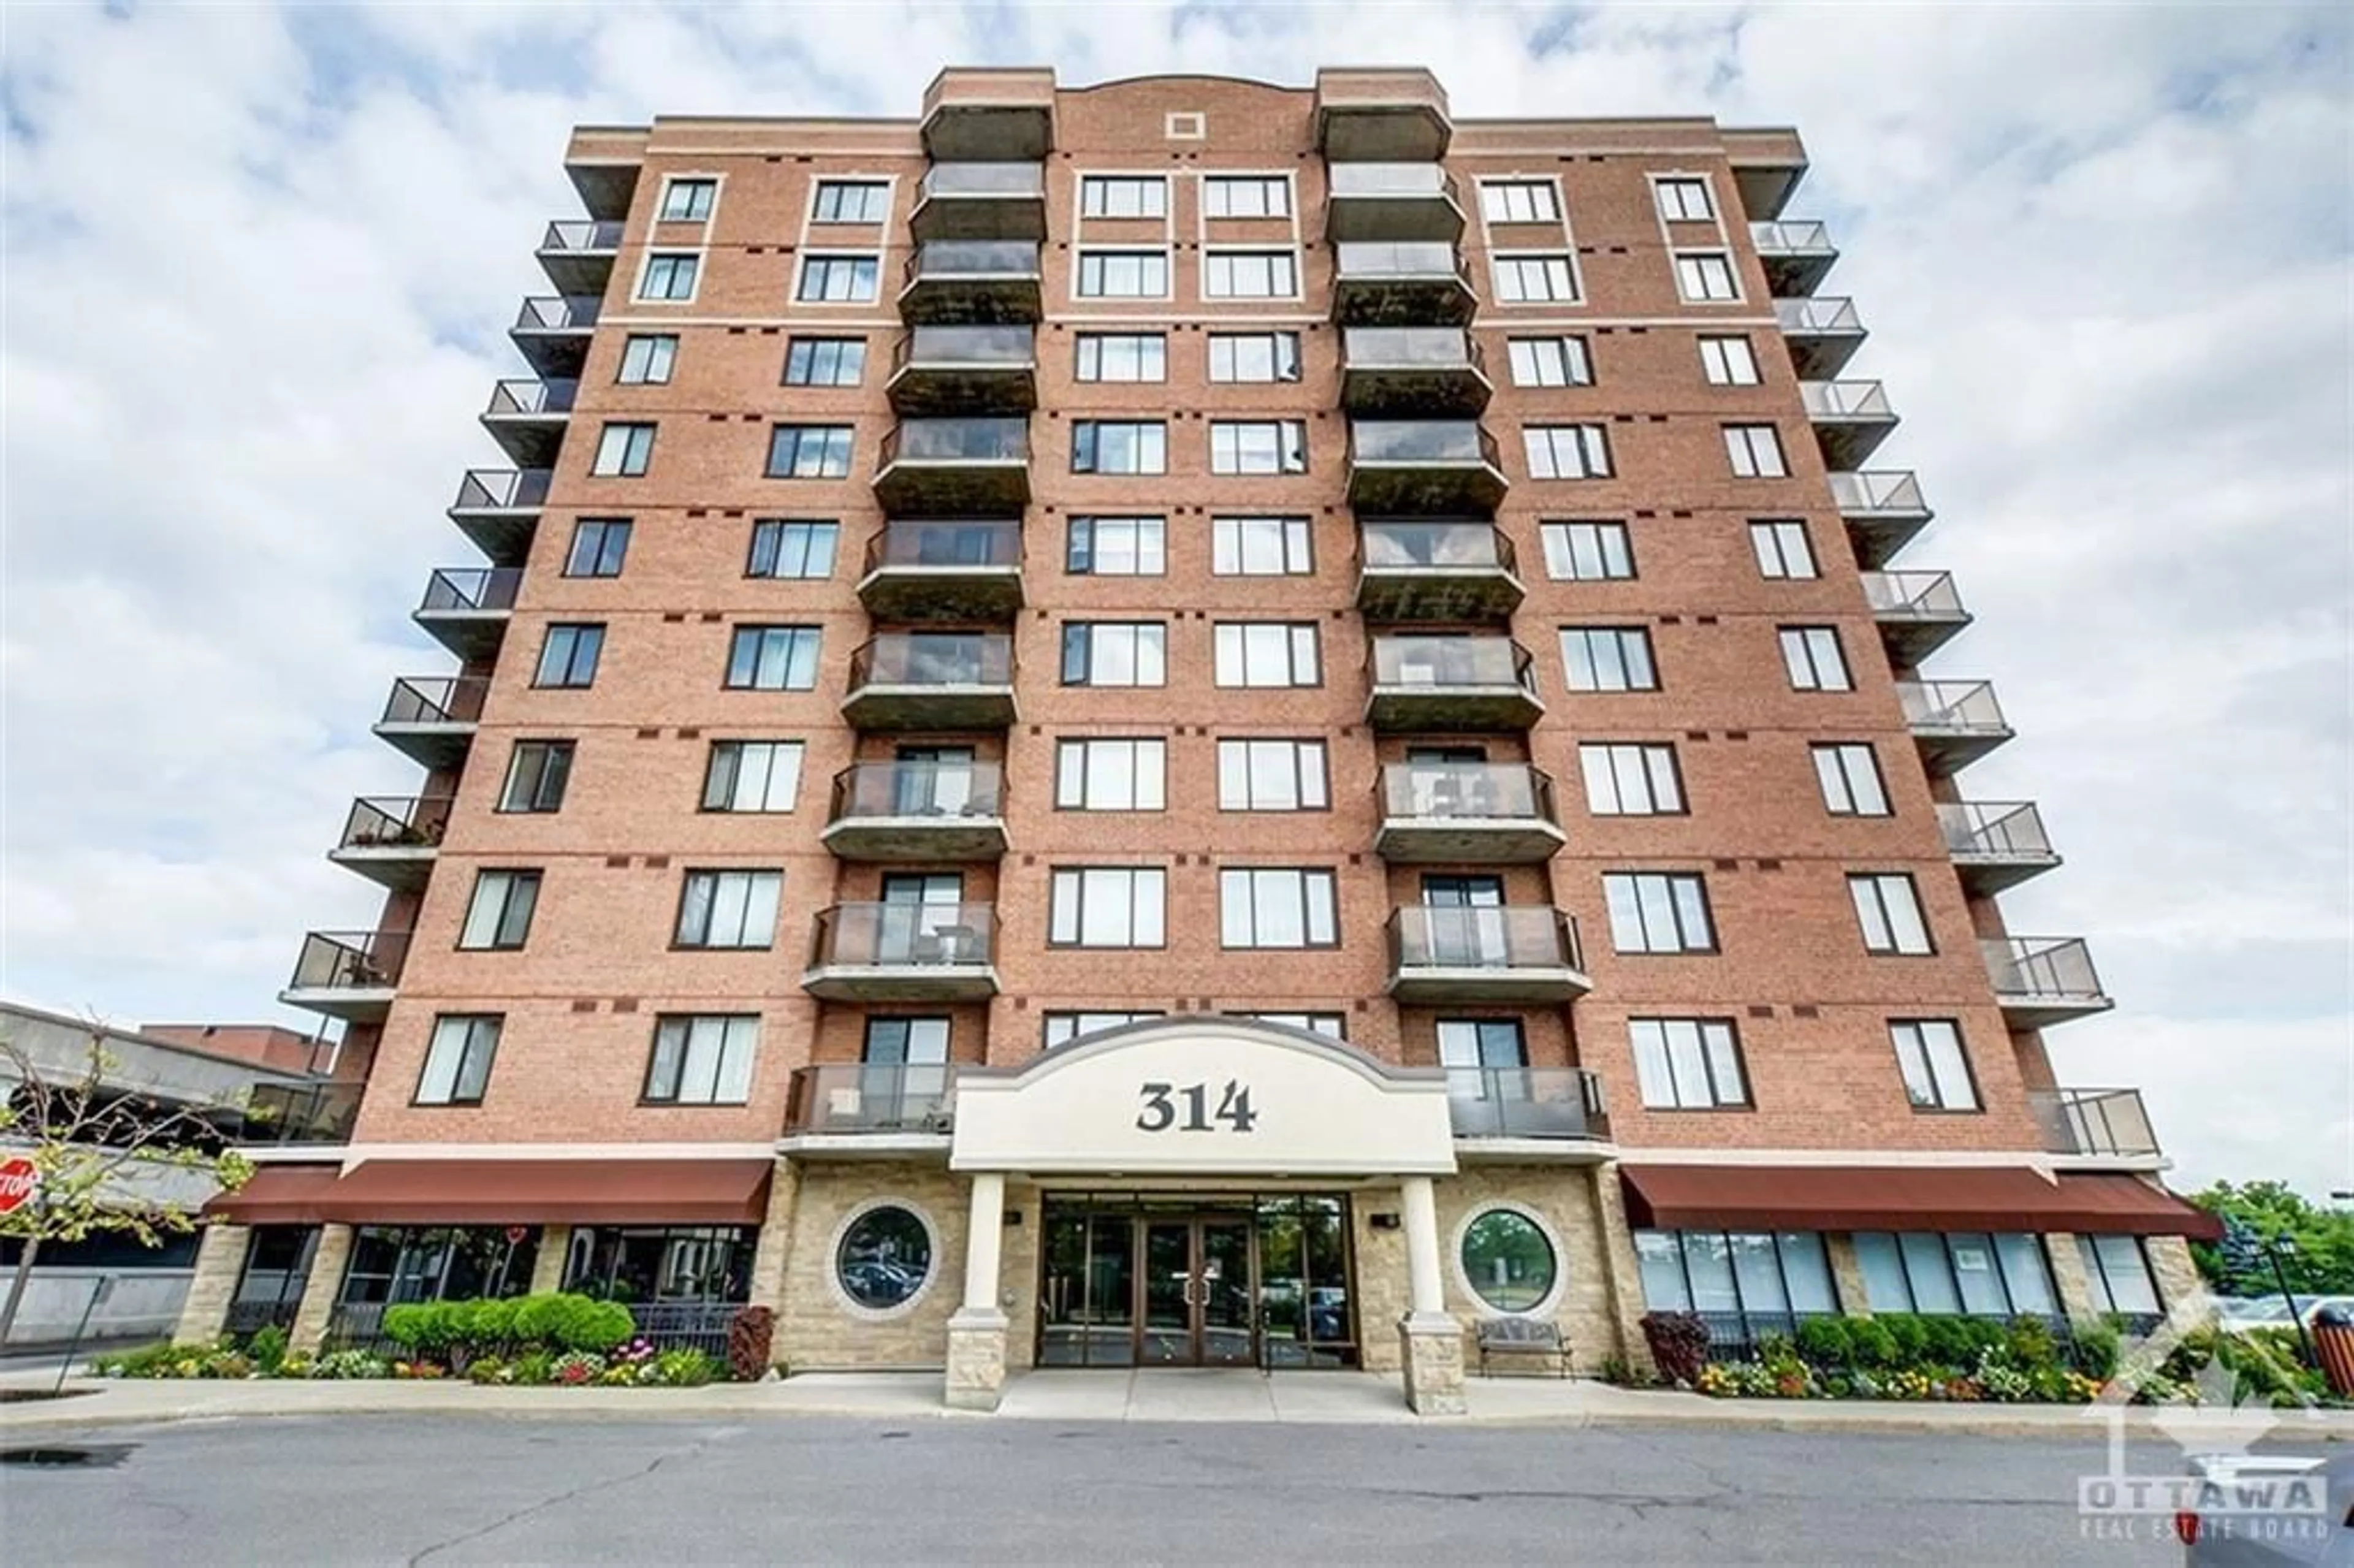 A pic from exterior of the house or condo for 314 CENTRAL PARK Dr #206, Ottawa Ontario K2C 4G4